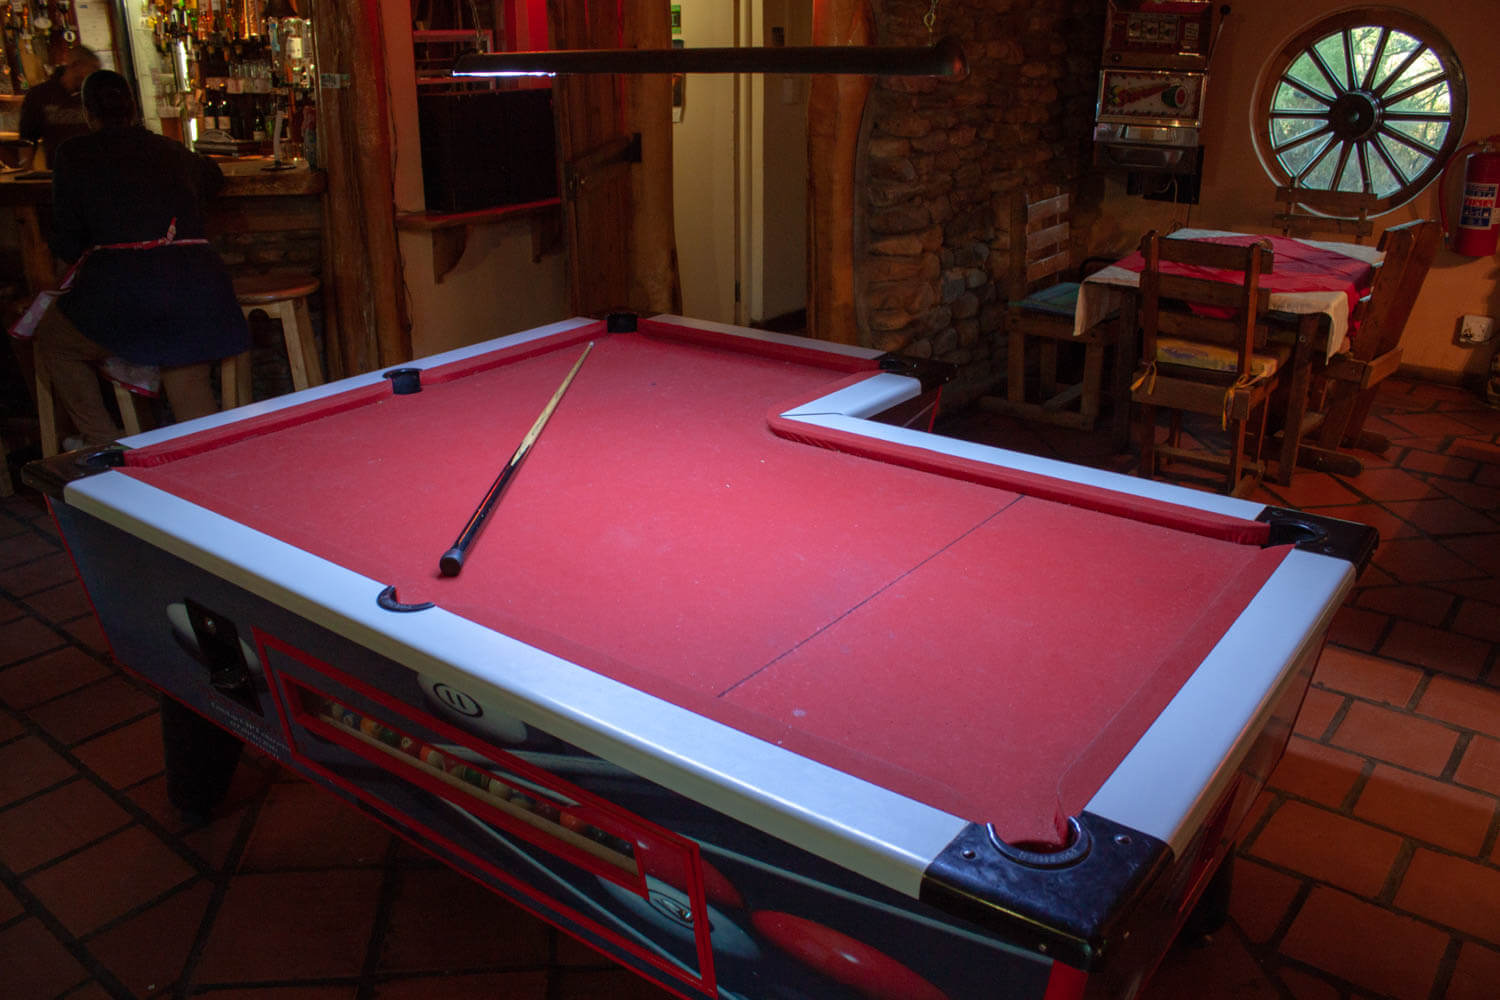 Funny-shaped pool table at 